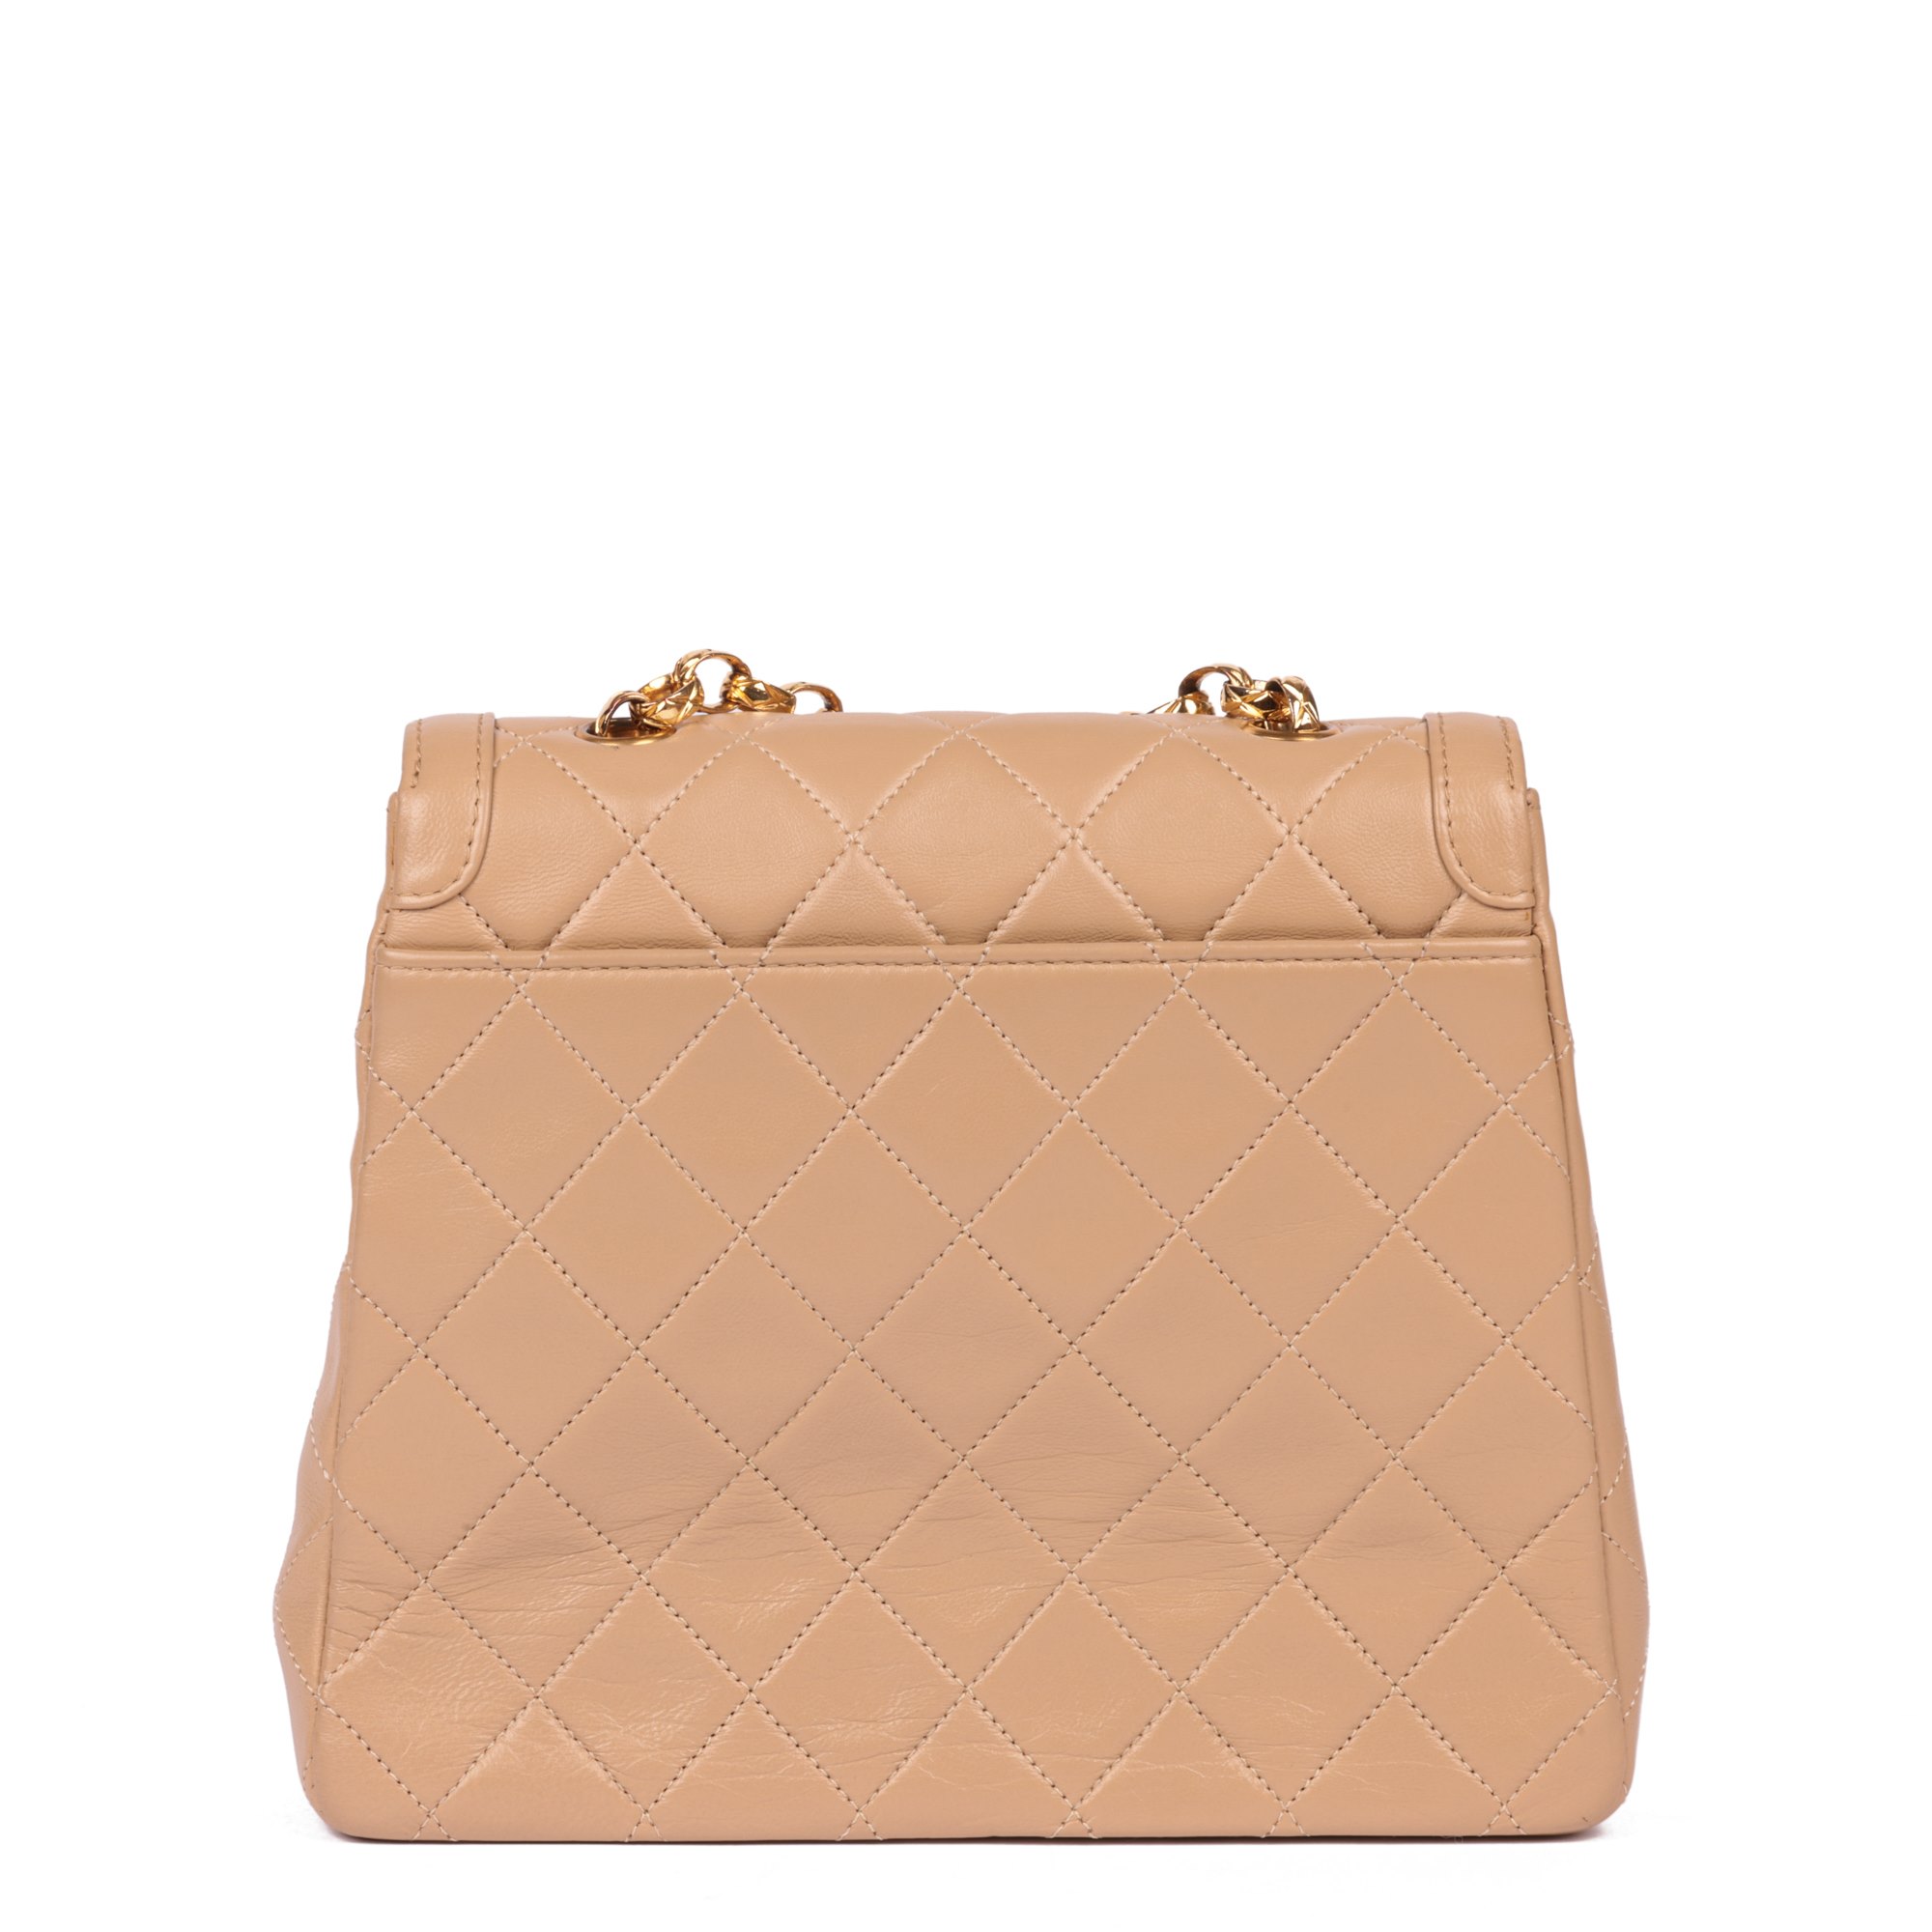 Chanel Beige Quilted Lambskin Vintage Mini Flap Bag with Wallet